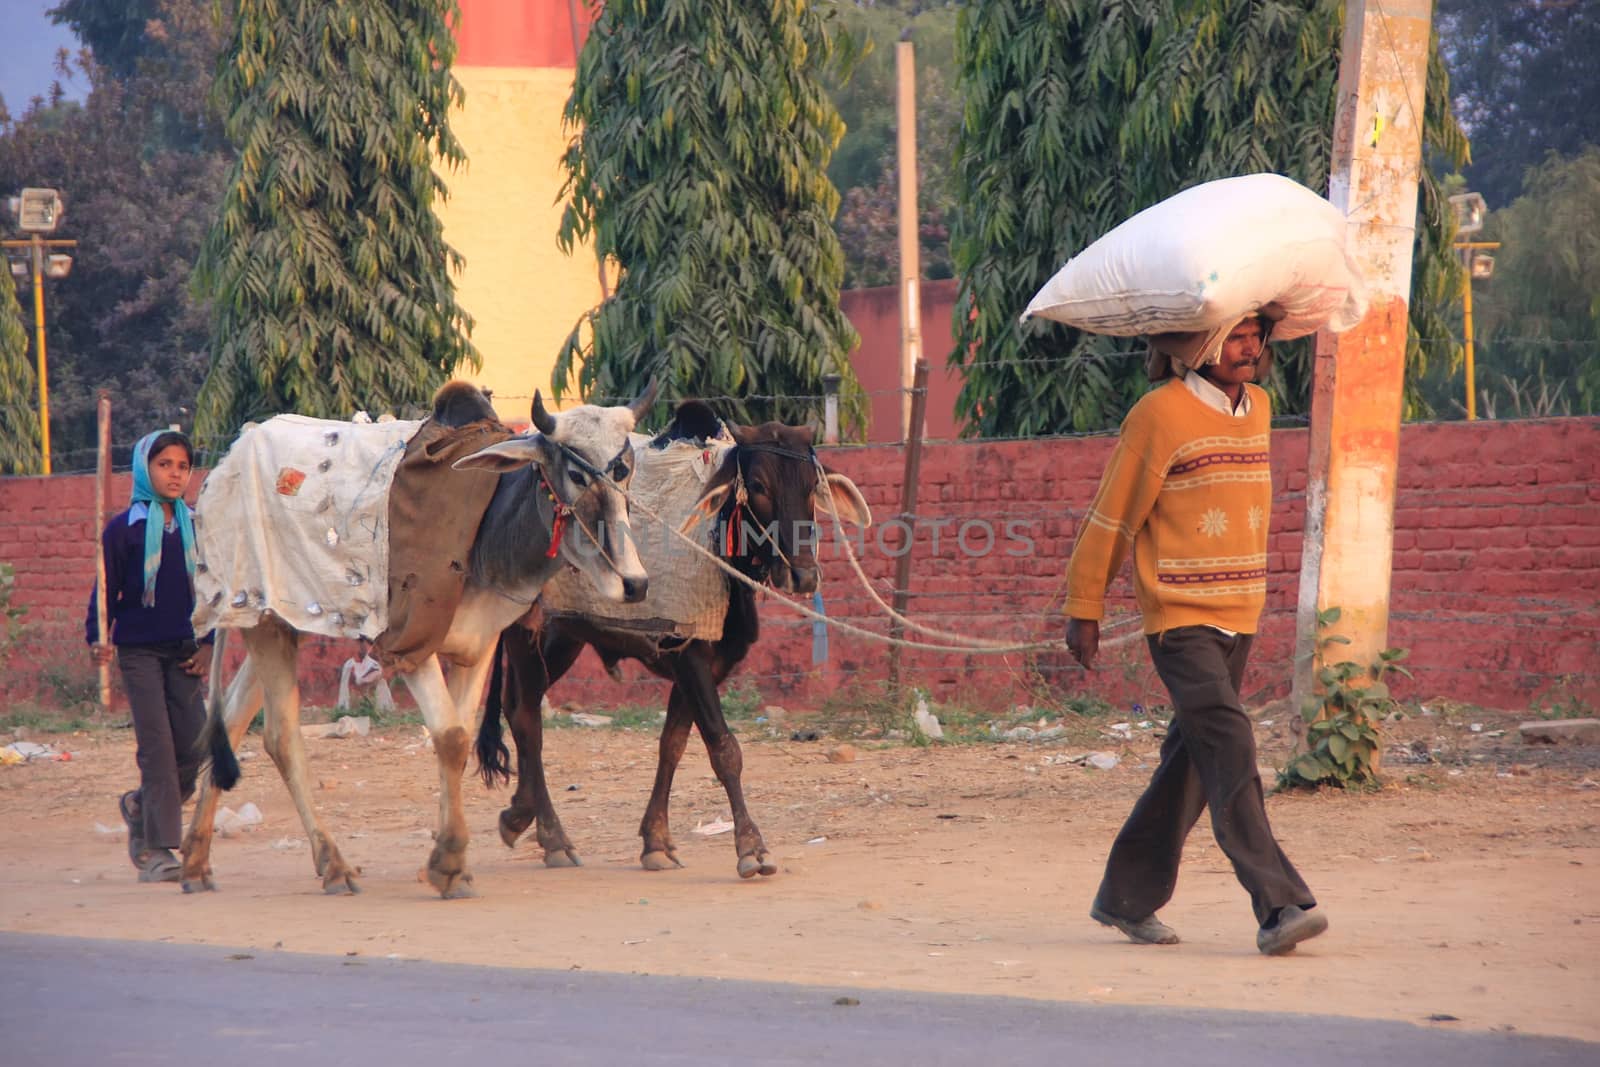 Father and daughter going along the road with cows, Sawai Madhopur, Rajasthan, India